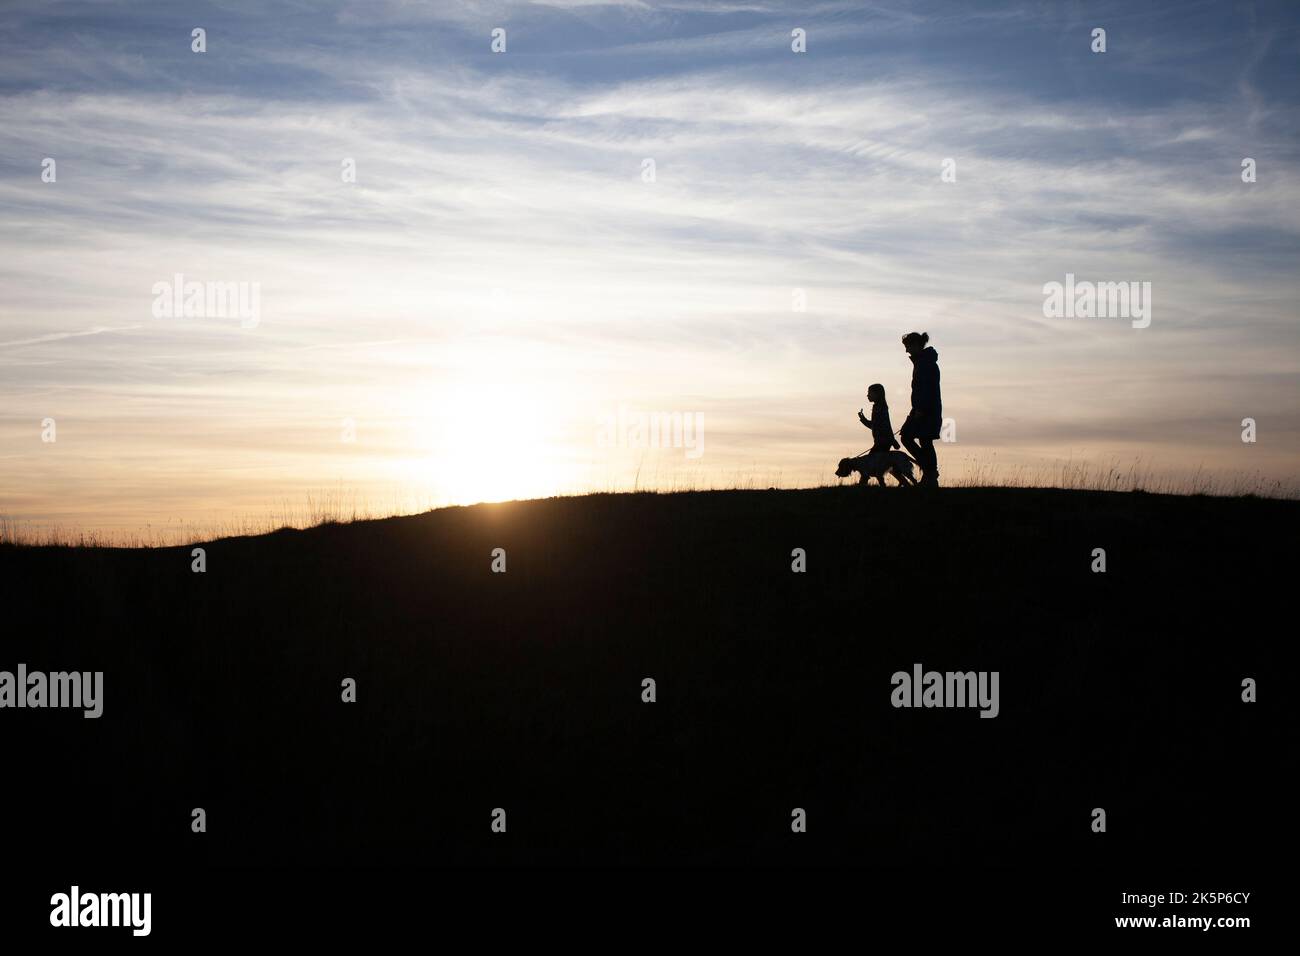 silhouette of people walking their dog Stock Photo